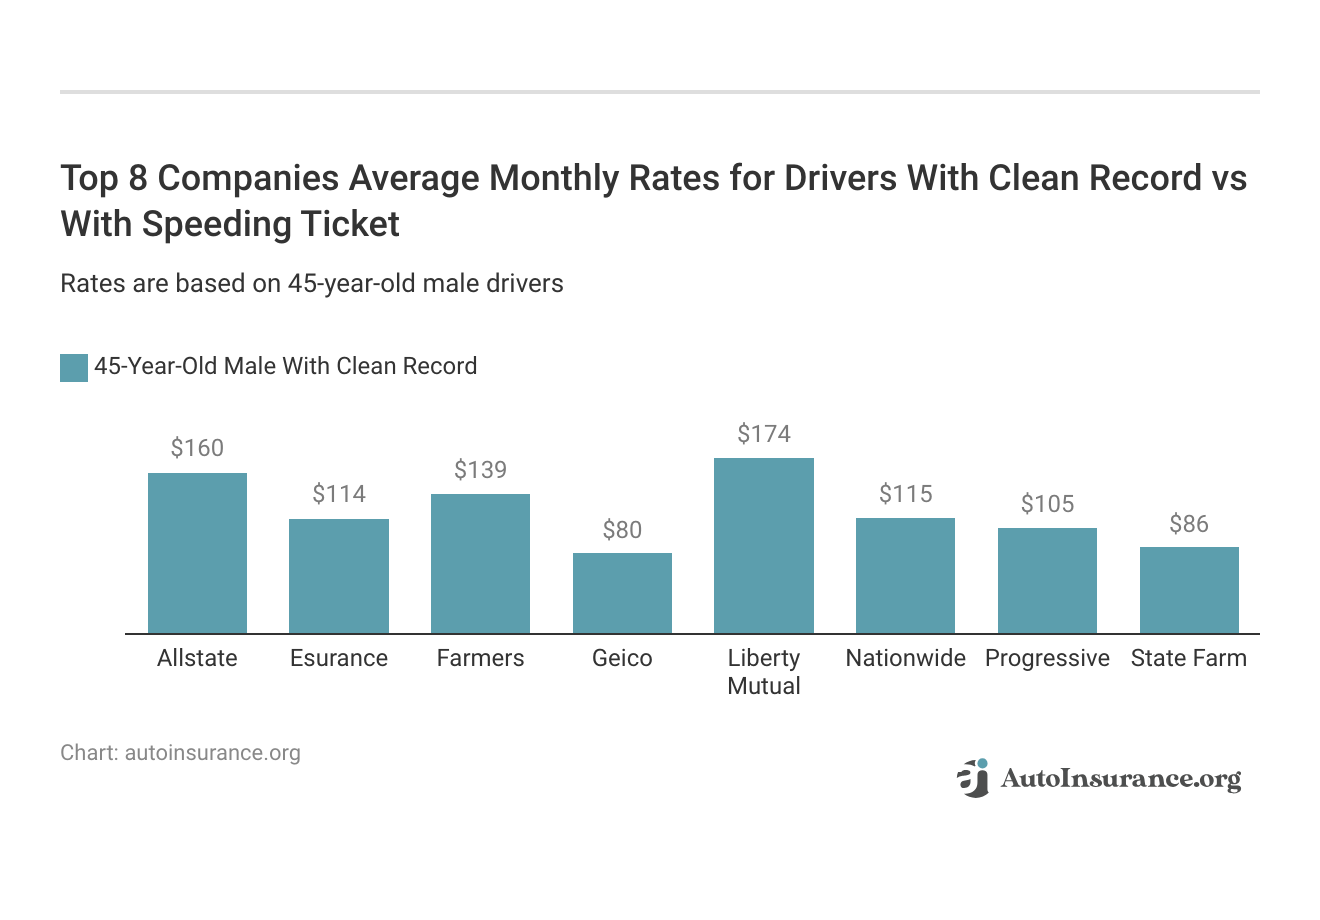 <h3>Top 8 Companies Average Monthly Rates for Drivers With Clean Record vs With Speeding Ticket</h3>